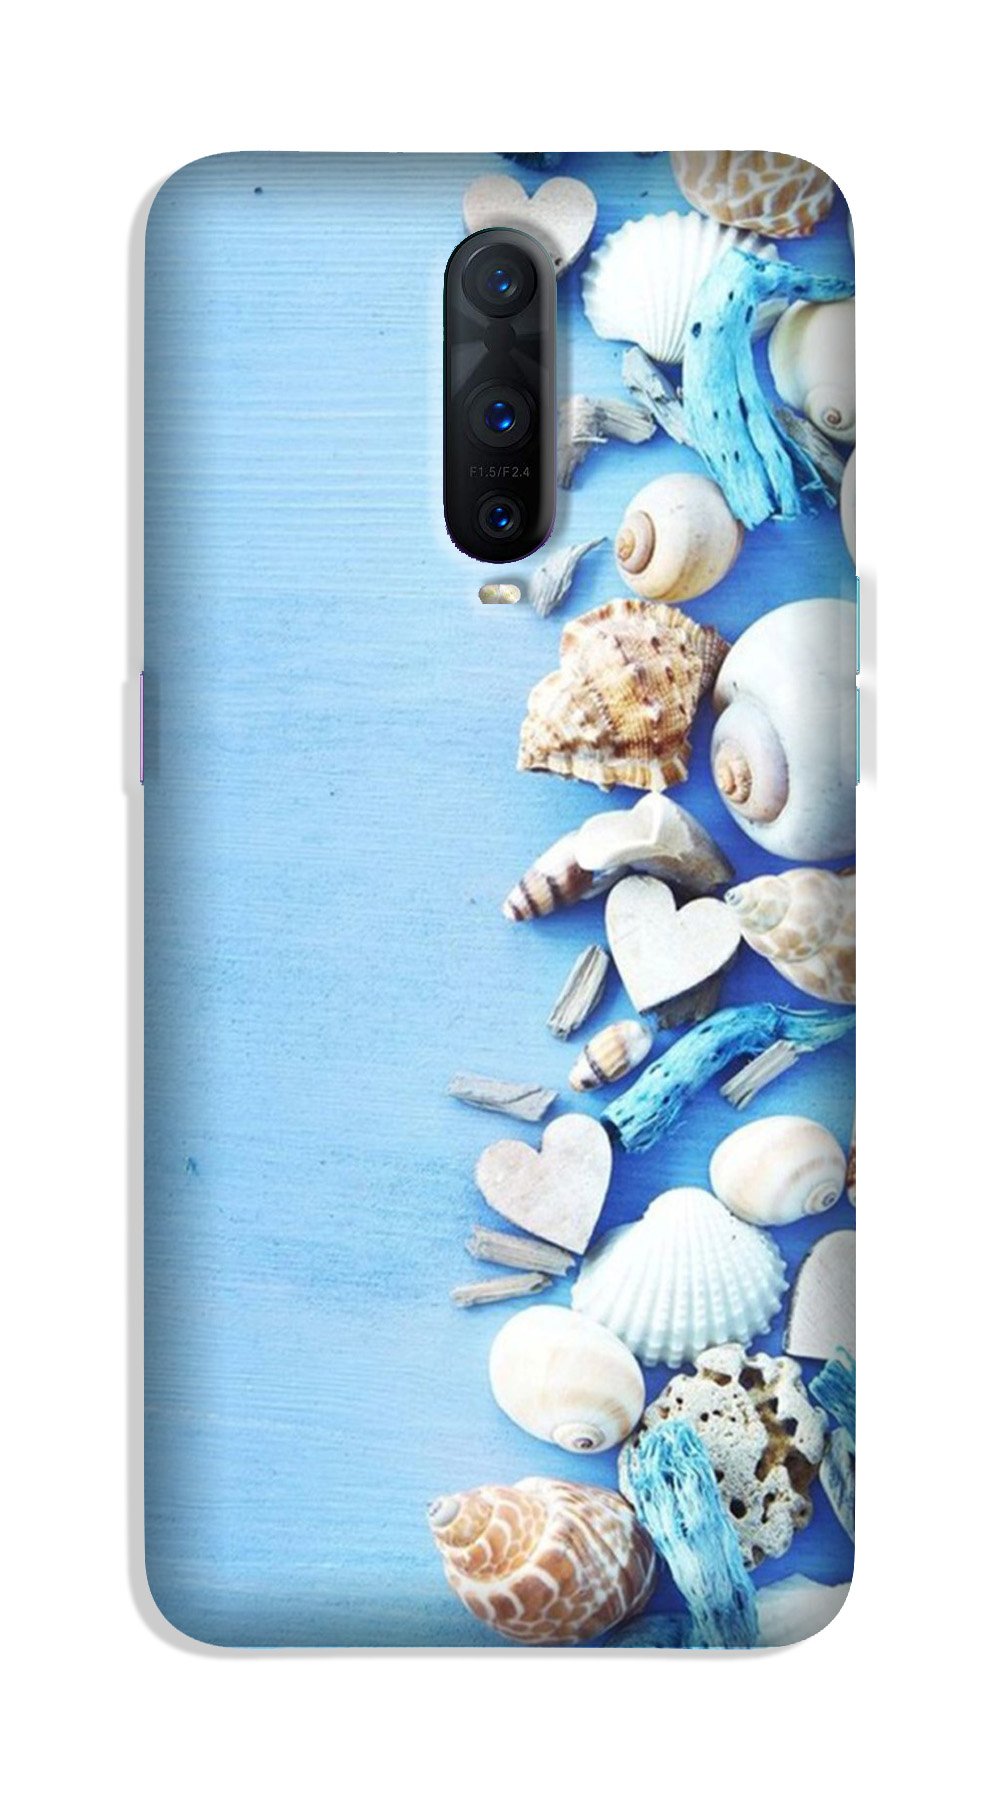 Sea Shells2 Case for OnePlus 7 Pro